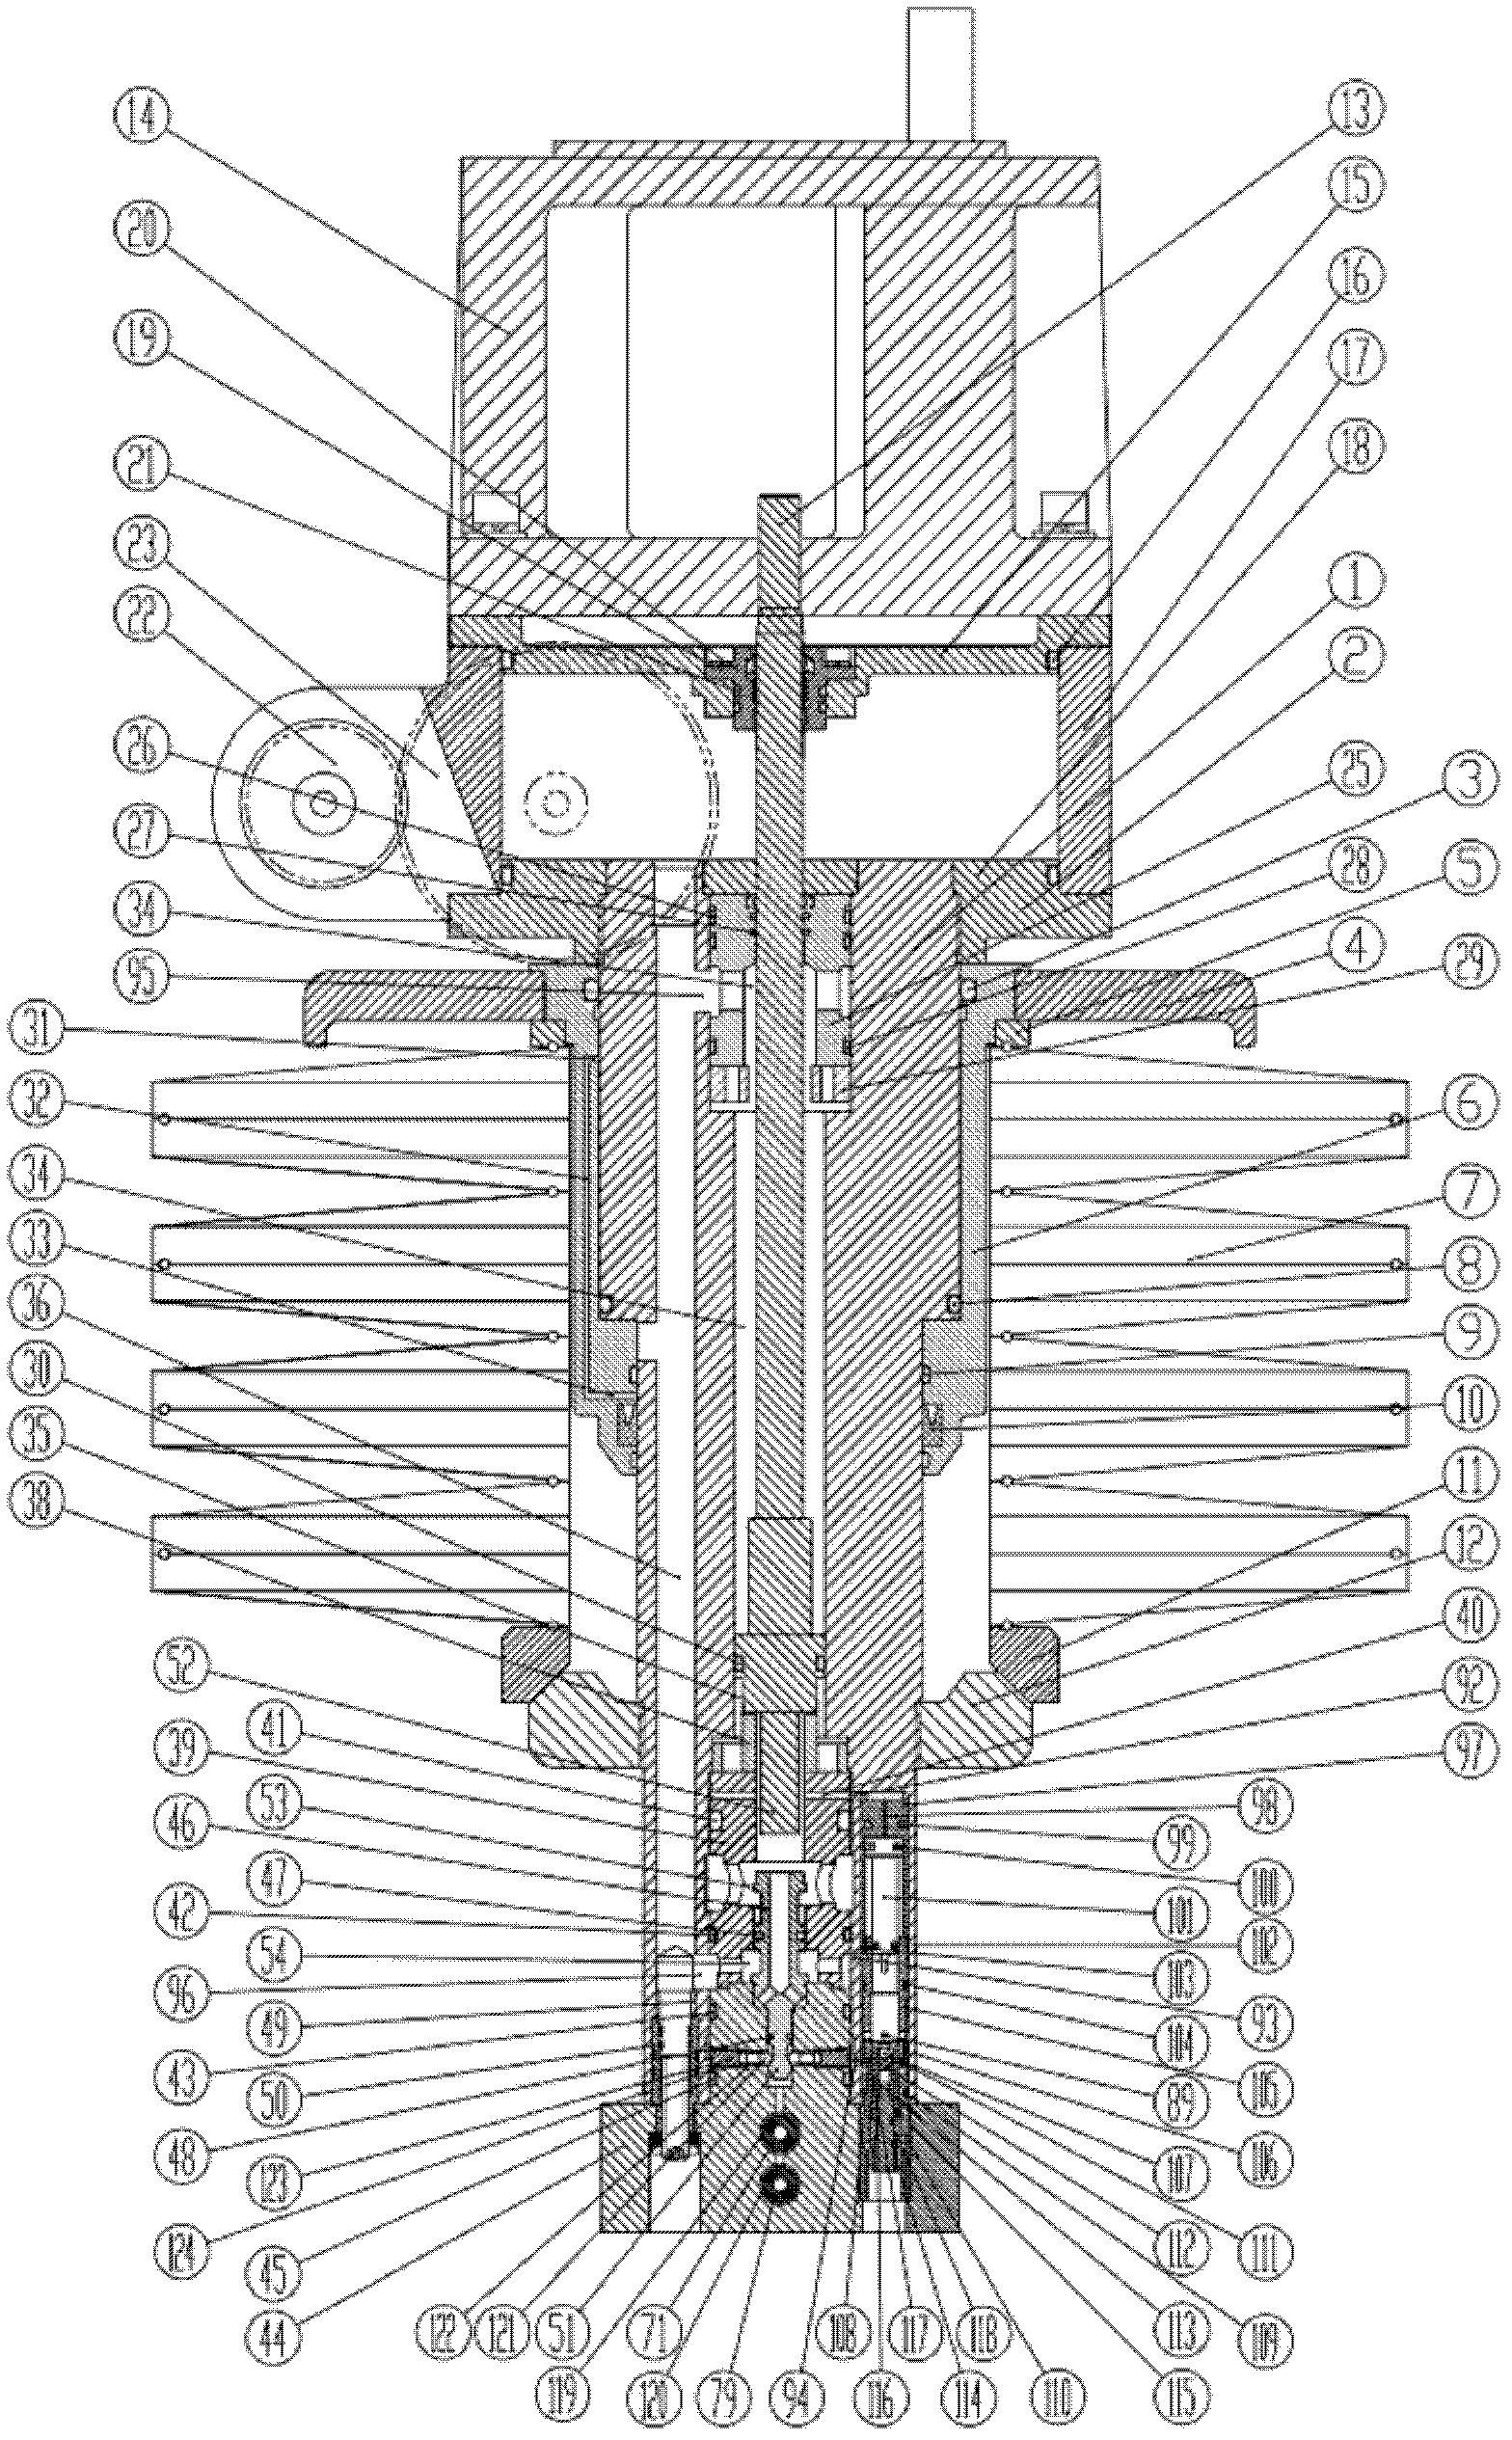 Working cylinder integrated with control valve and high-power hydraulic spring operating mechanism